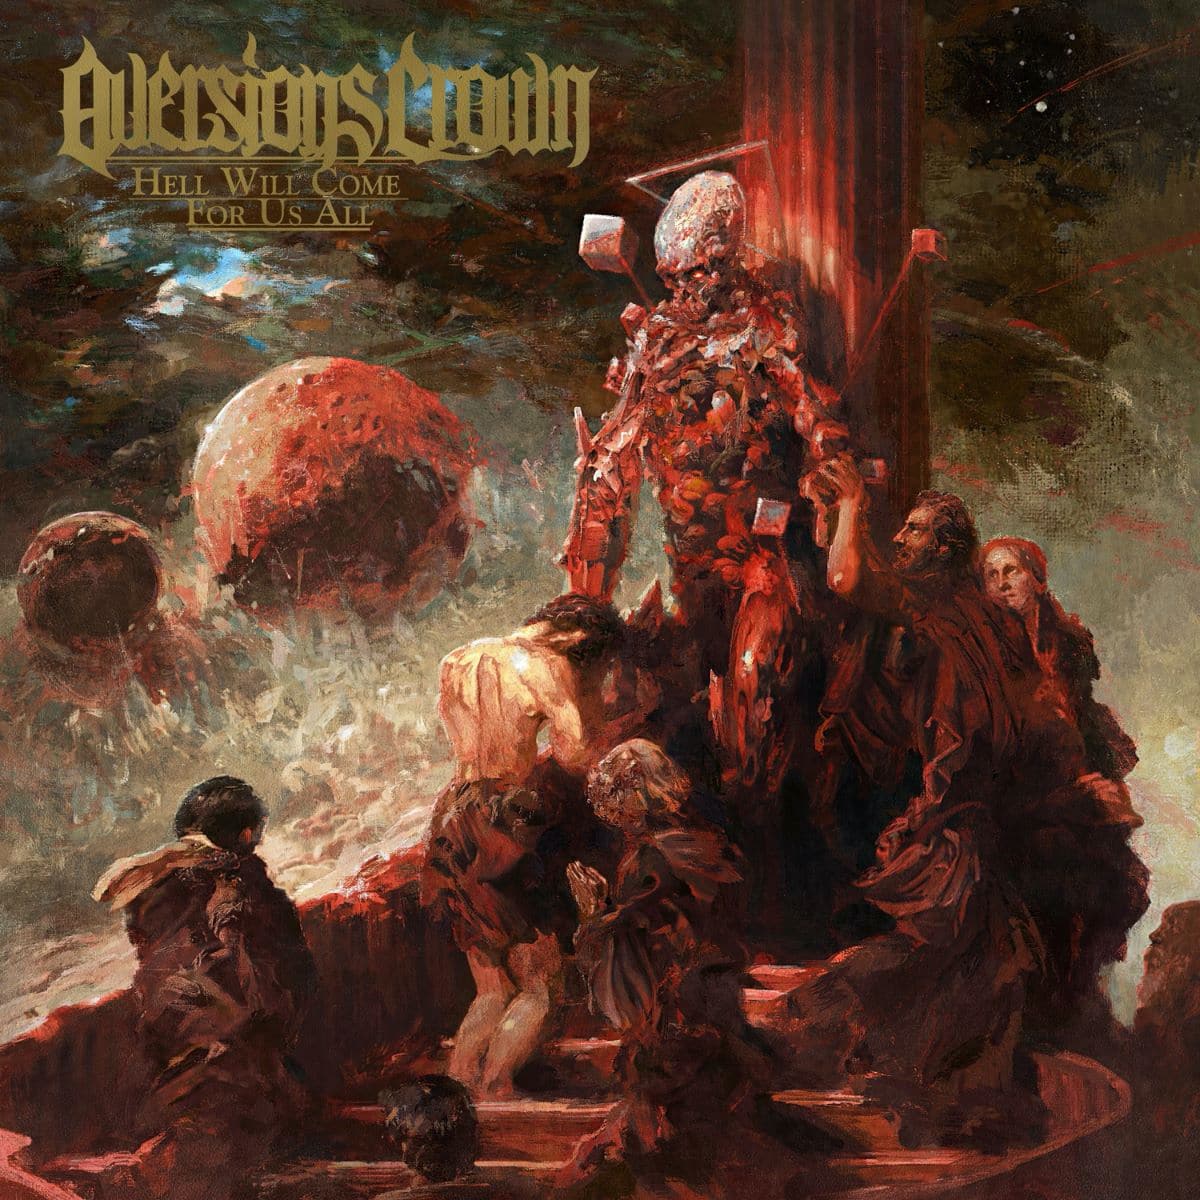 aversions-crown-he-will-come-for-us-all-album-cover